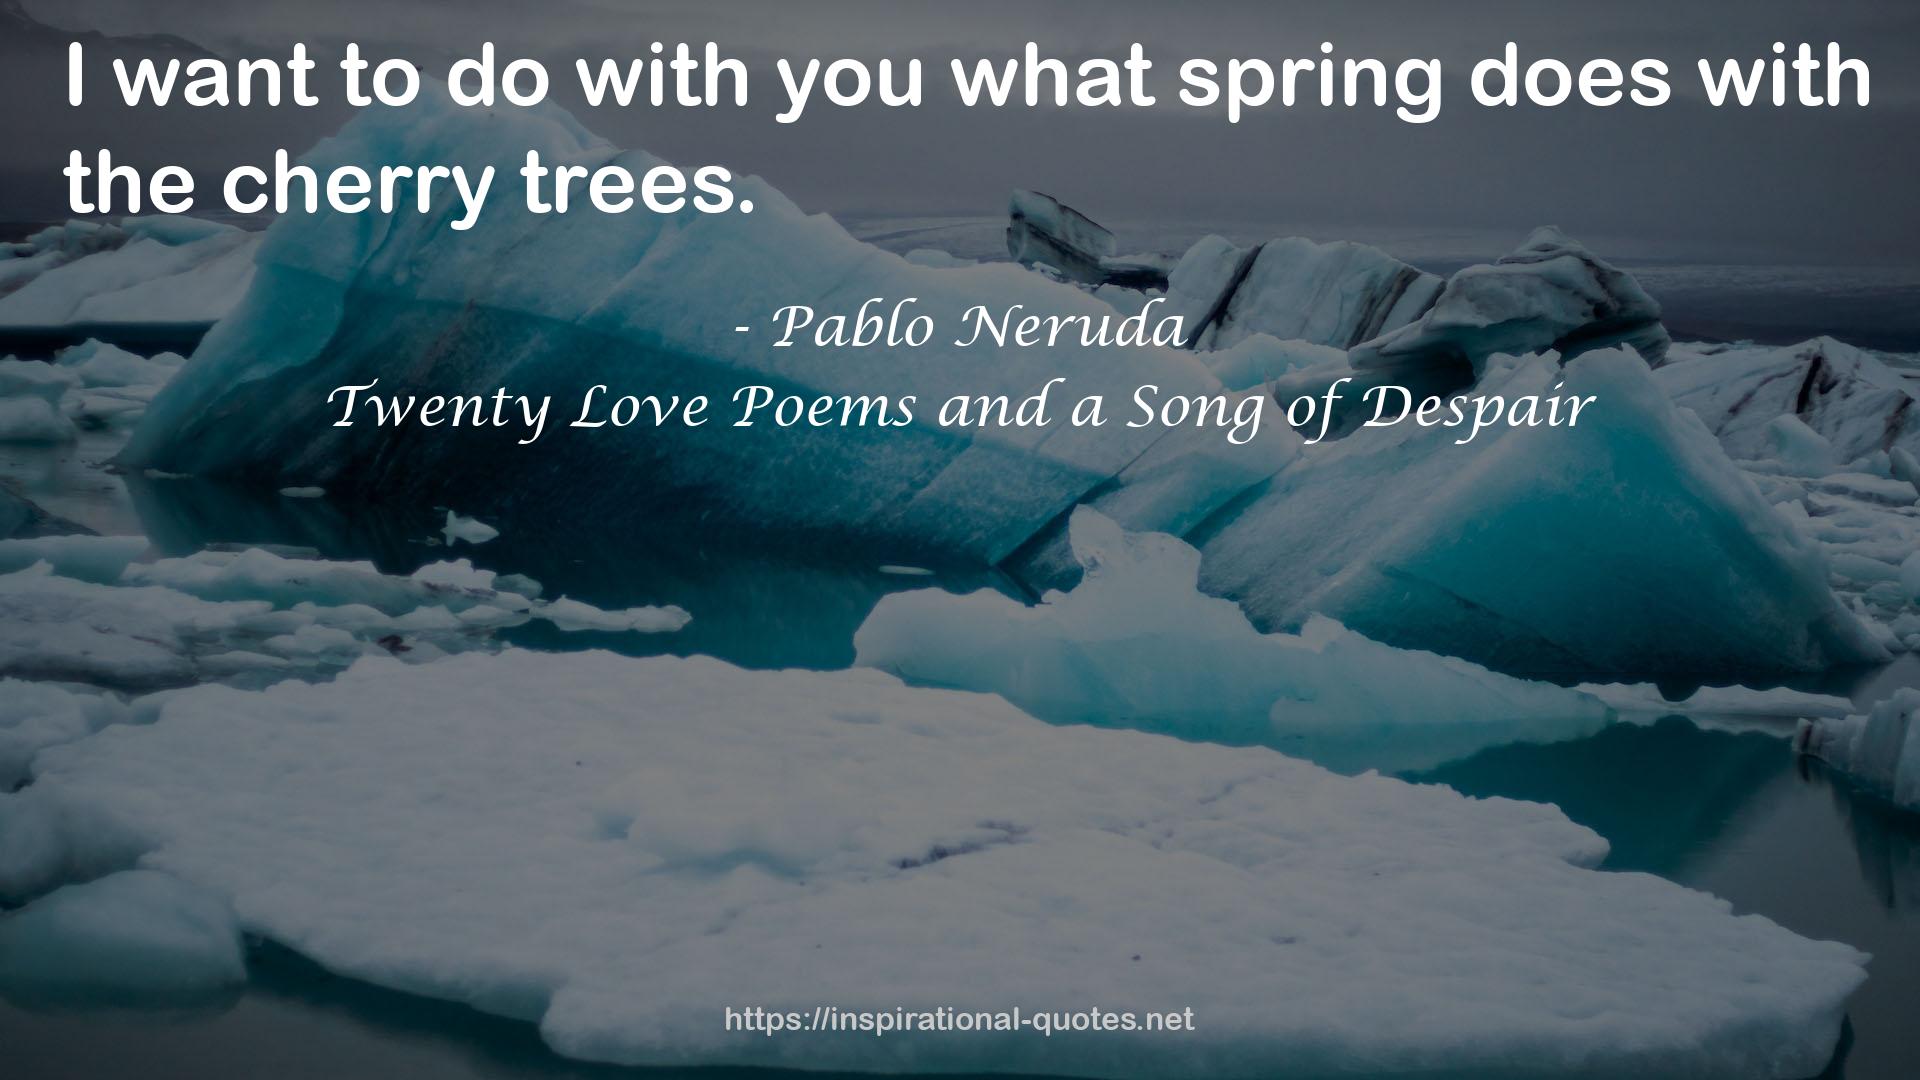 Twenty Love Poems and a Song of Despair QUOTES